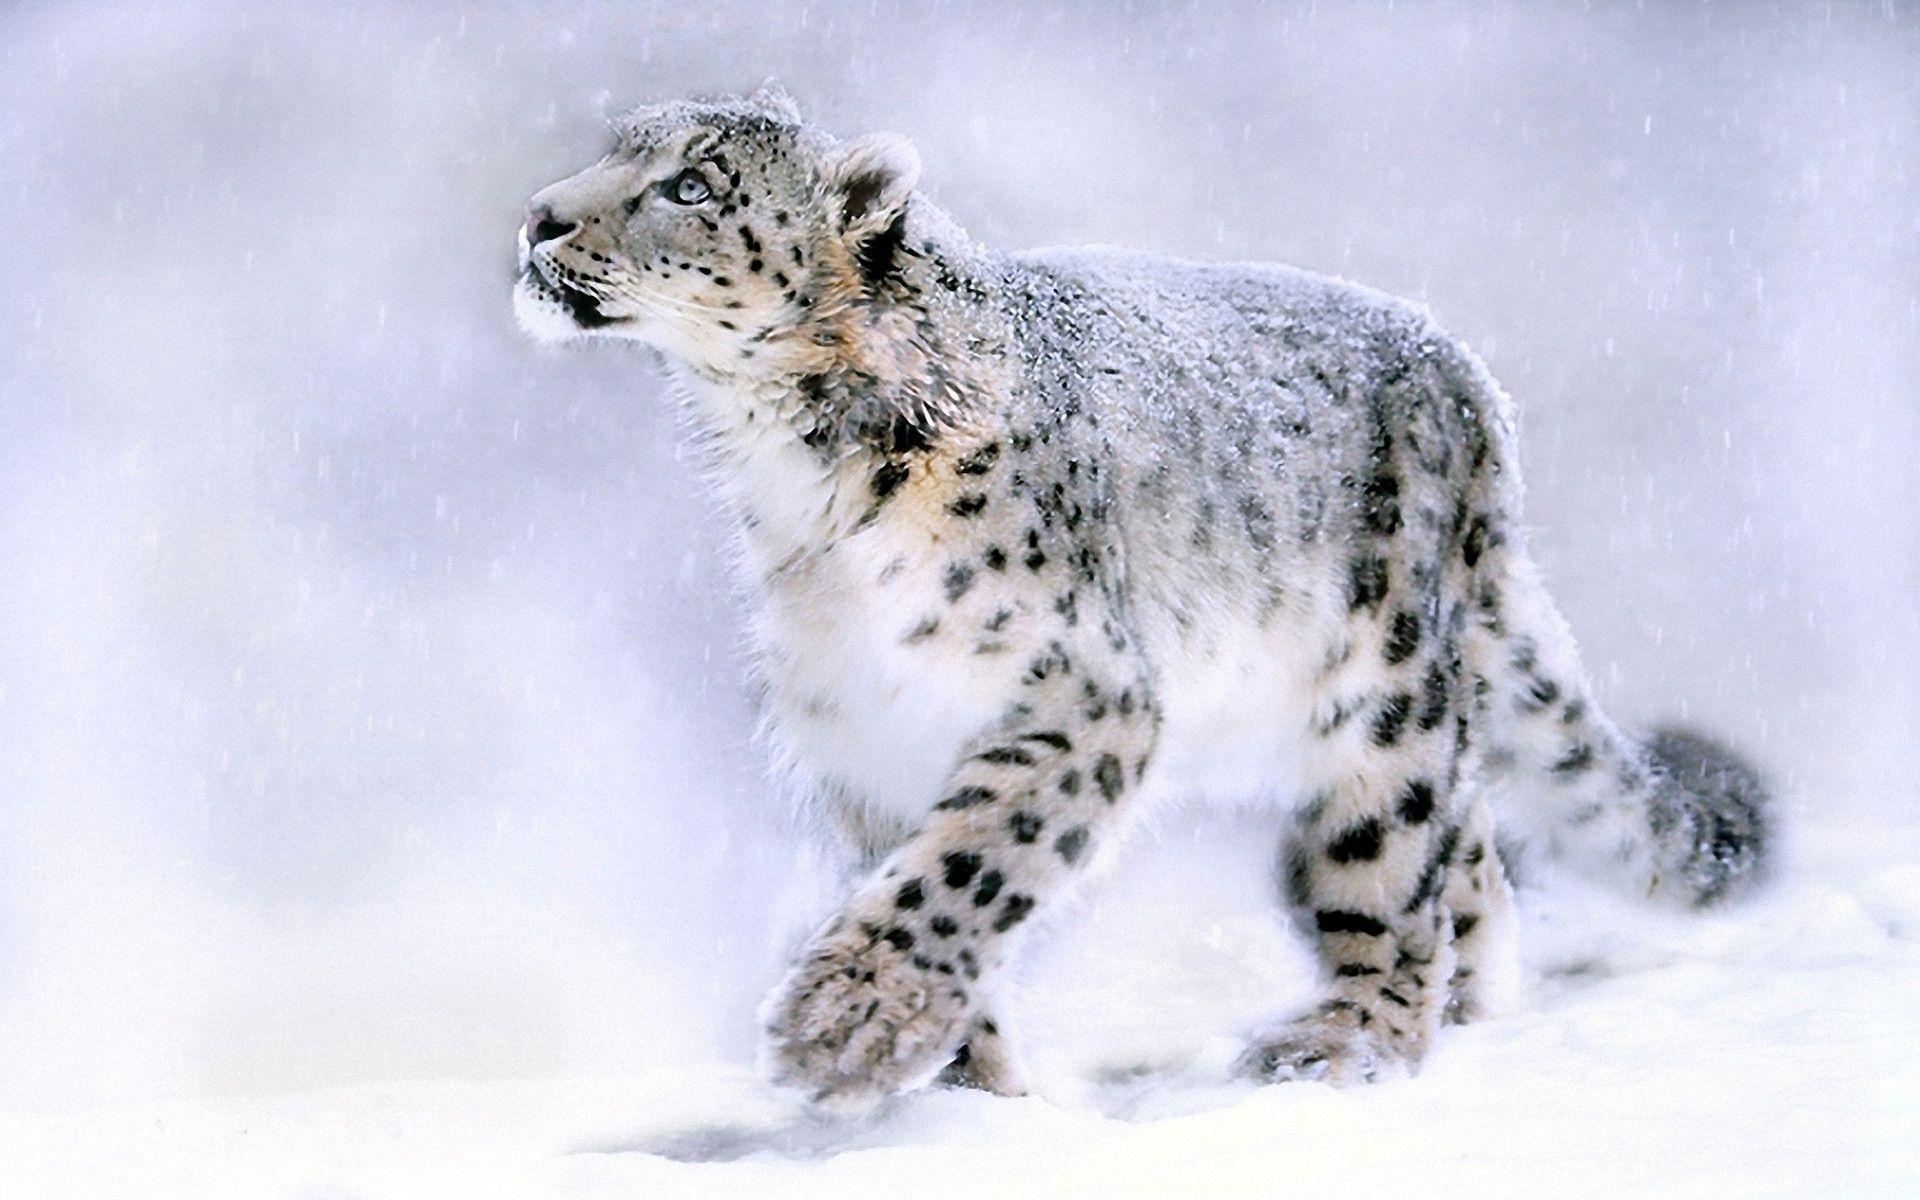 Snow Leopard Simulation For Android Free. Best Apps for Android